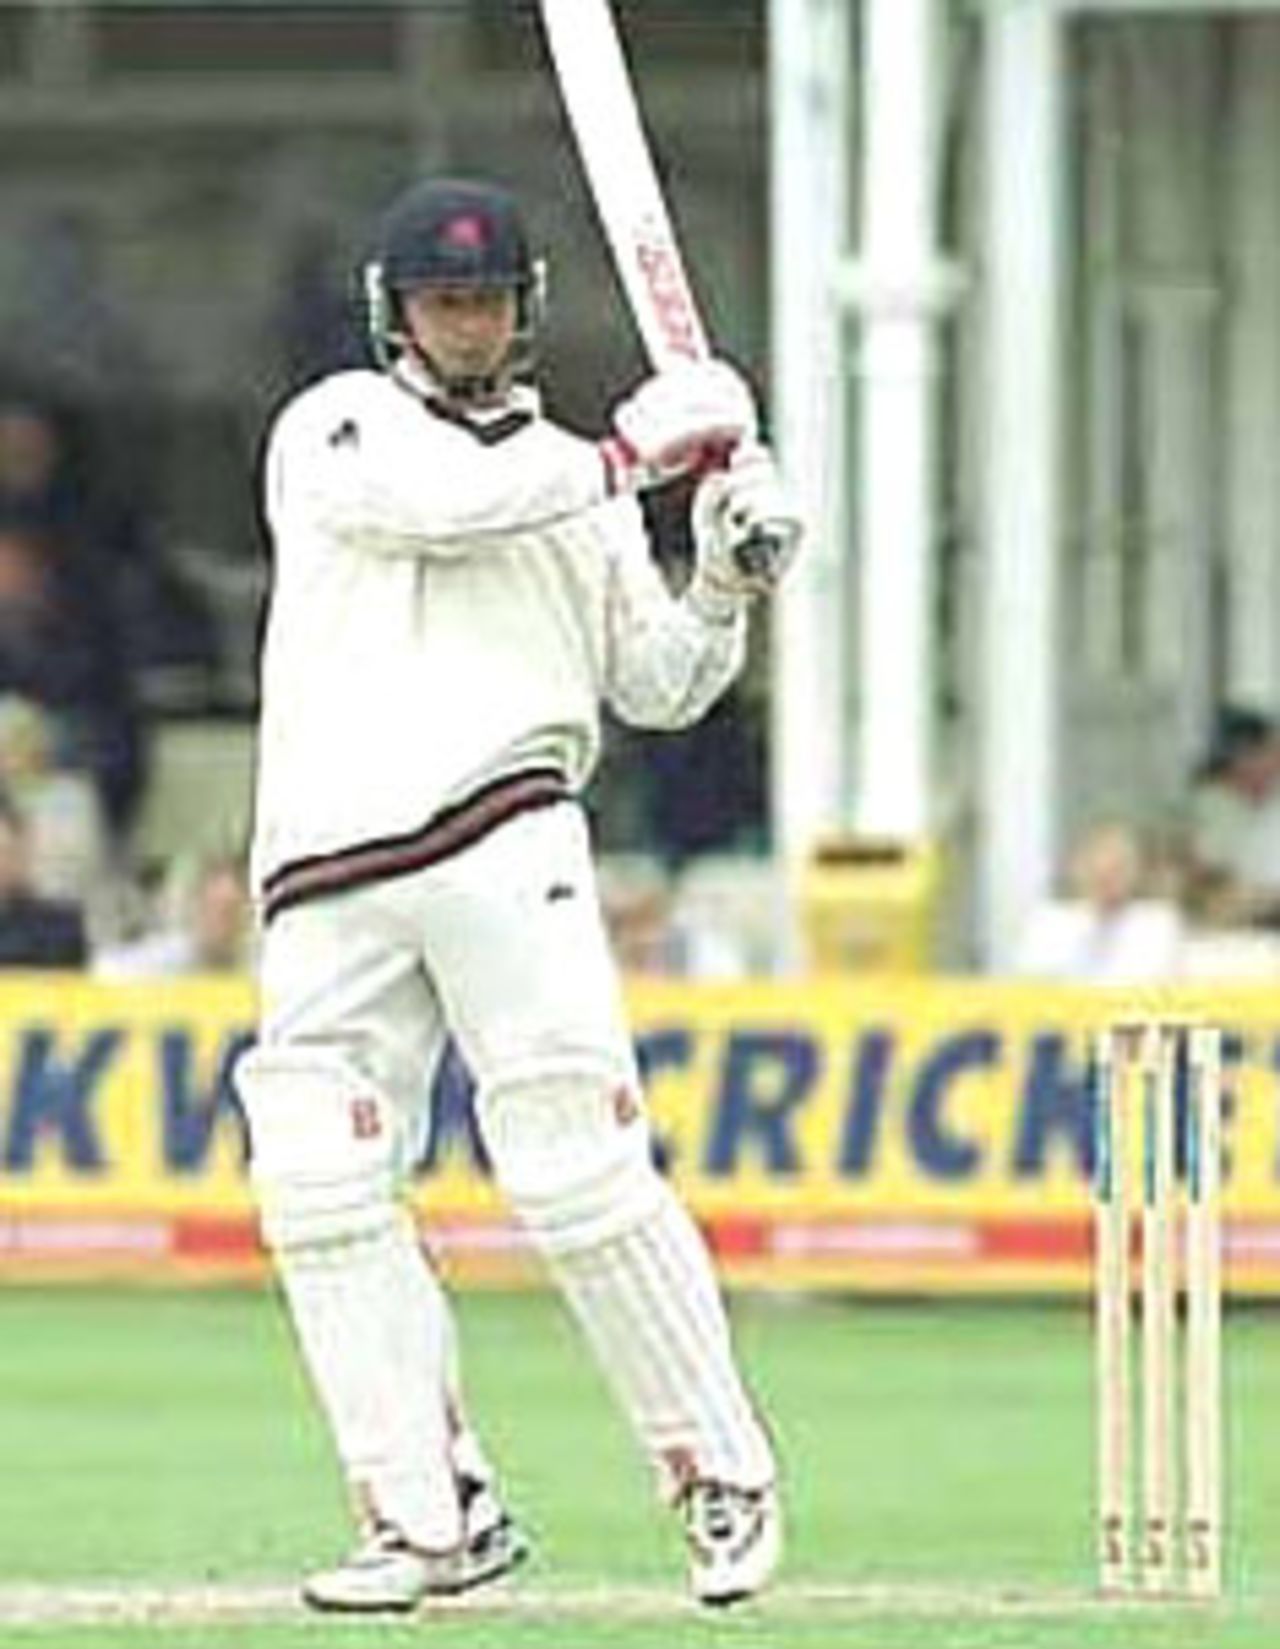 Graham Lloyd pulls the ball PPP healthcare County Championship Division One, 2000, Hampshire v Lancashire County Ground, Southampton, 23-26 May 2000 (Day 2).